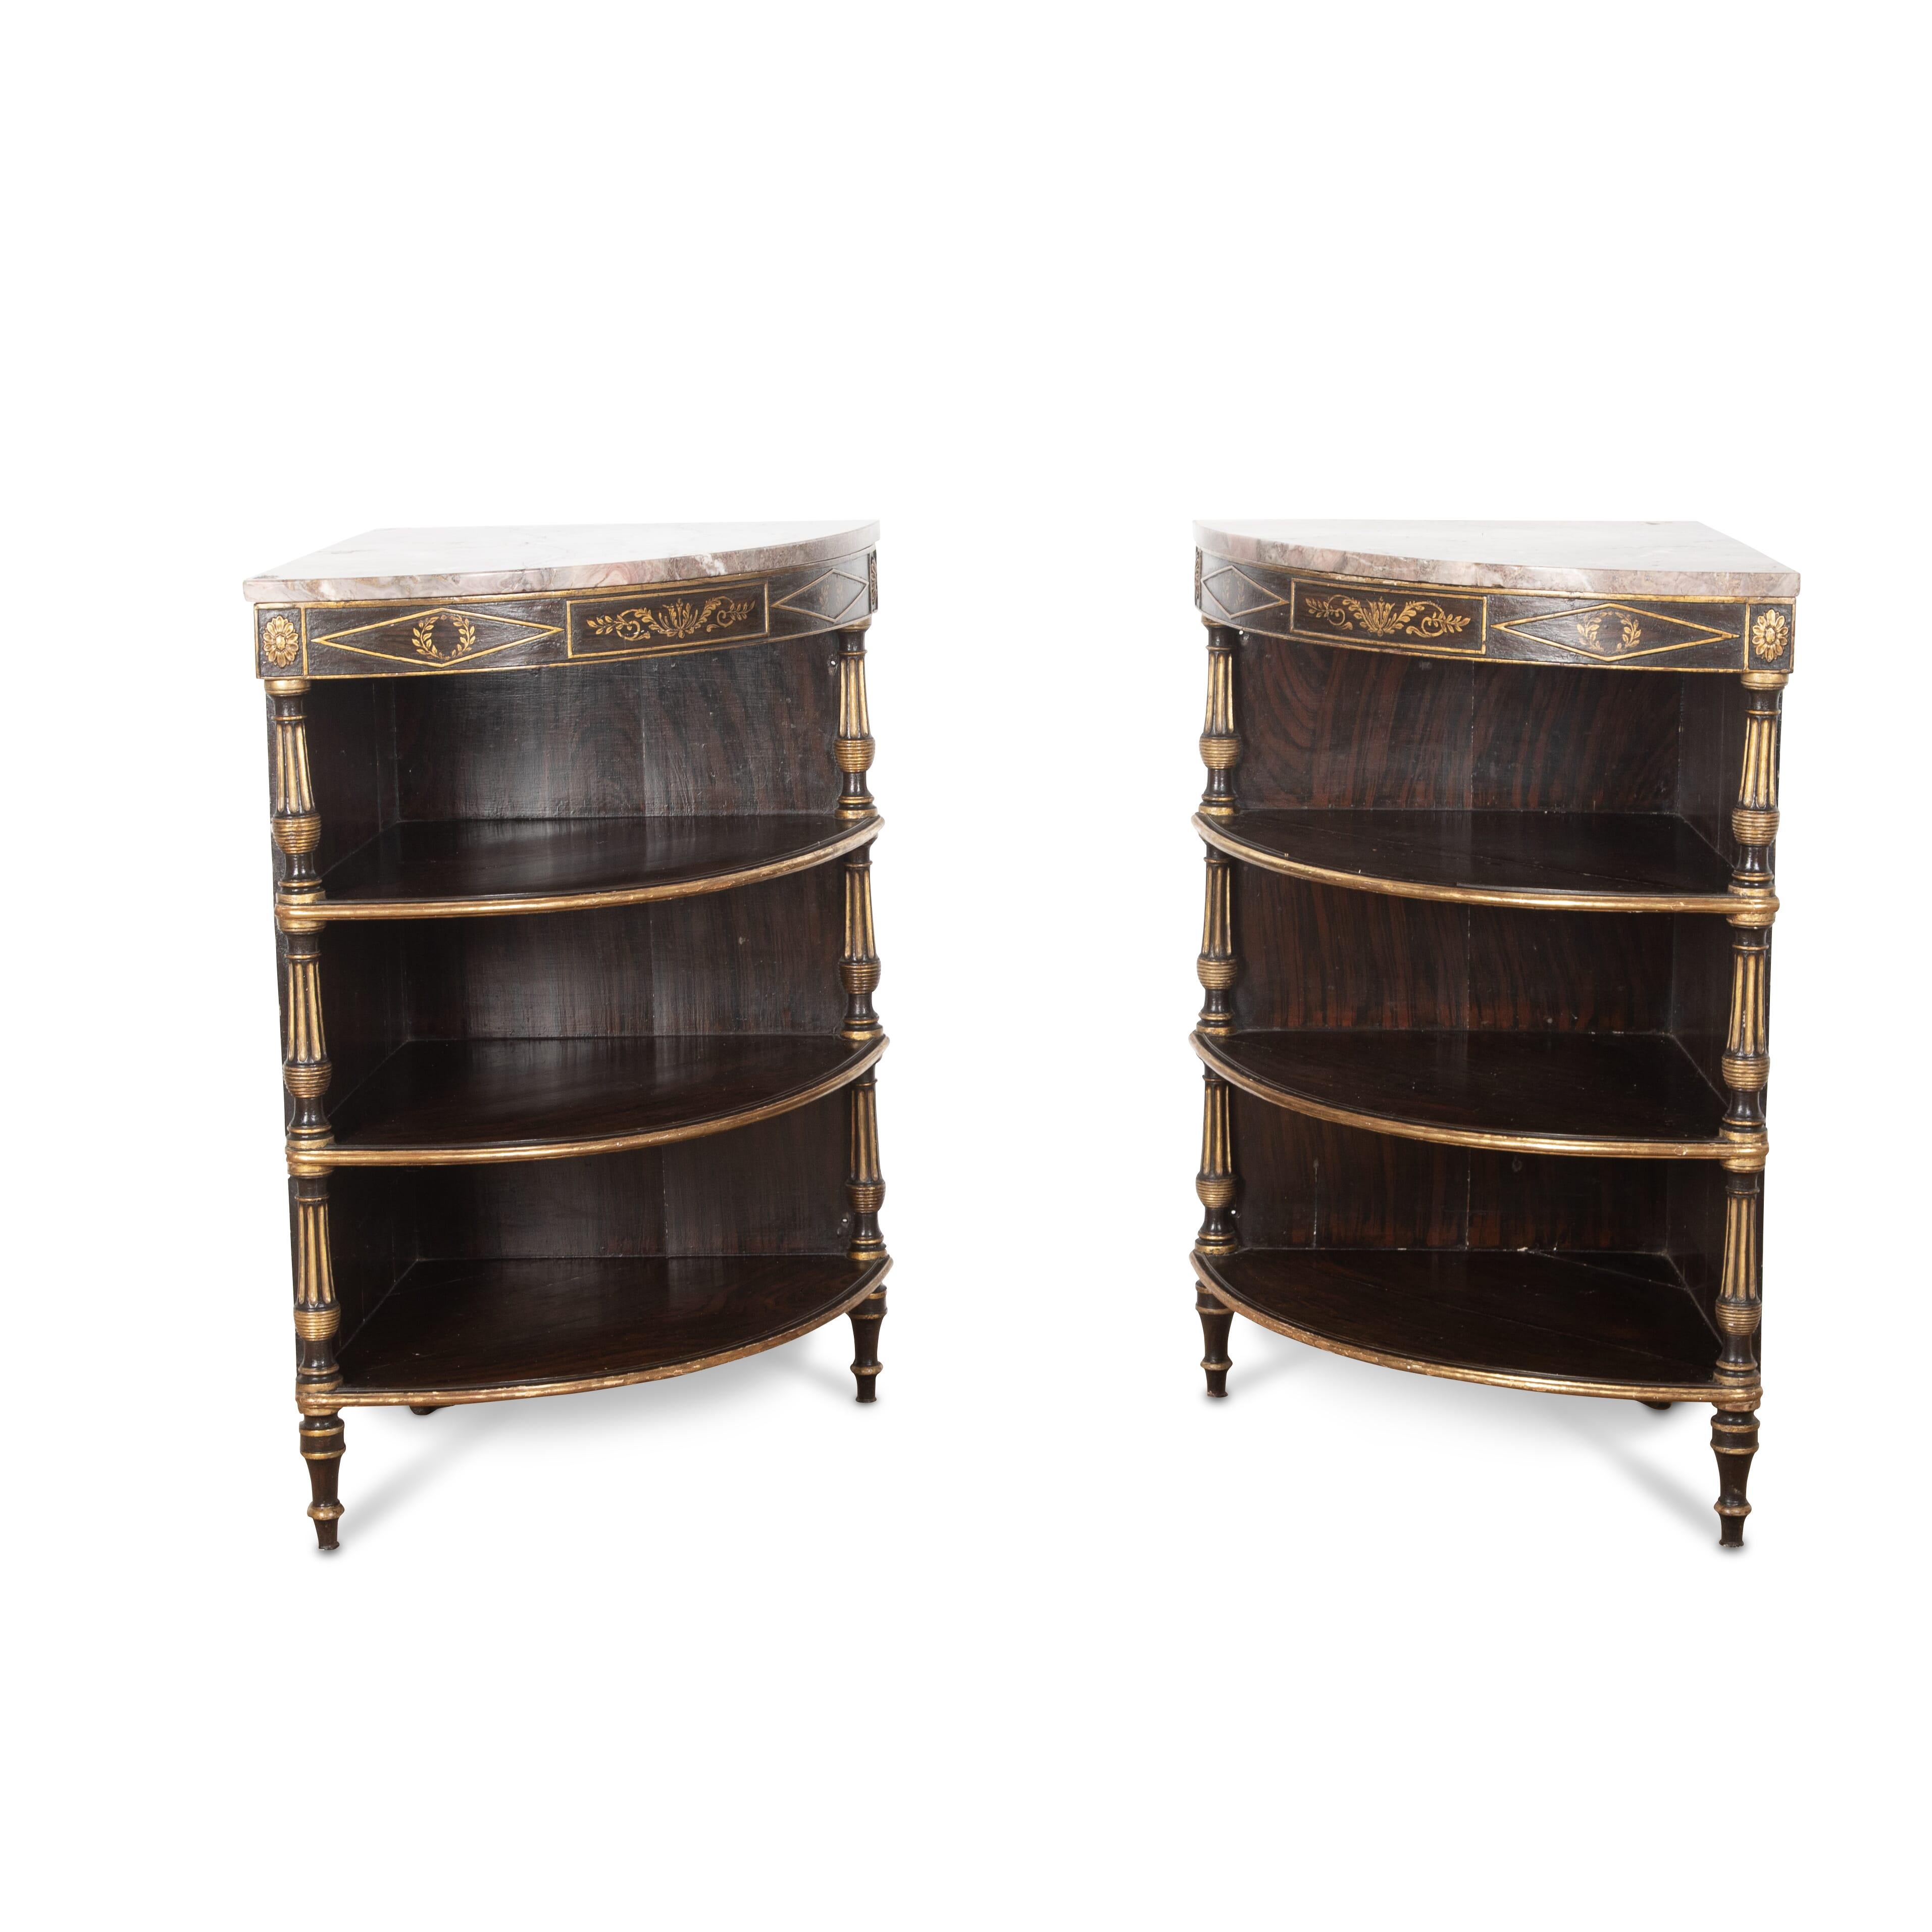 19th Century Regency Pair of Decorated & Marble Top Corner Cabinets For Sale